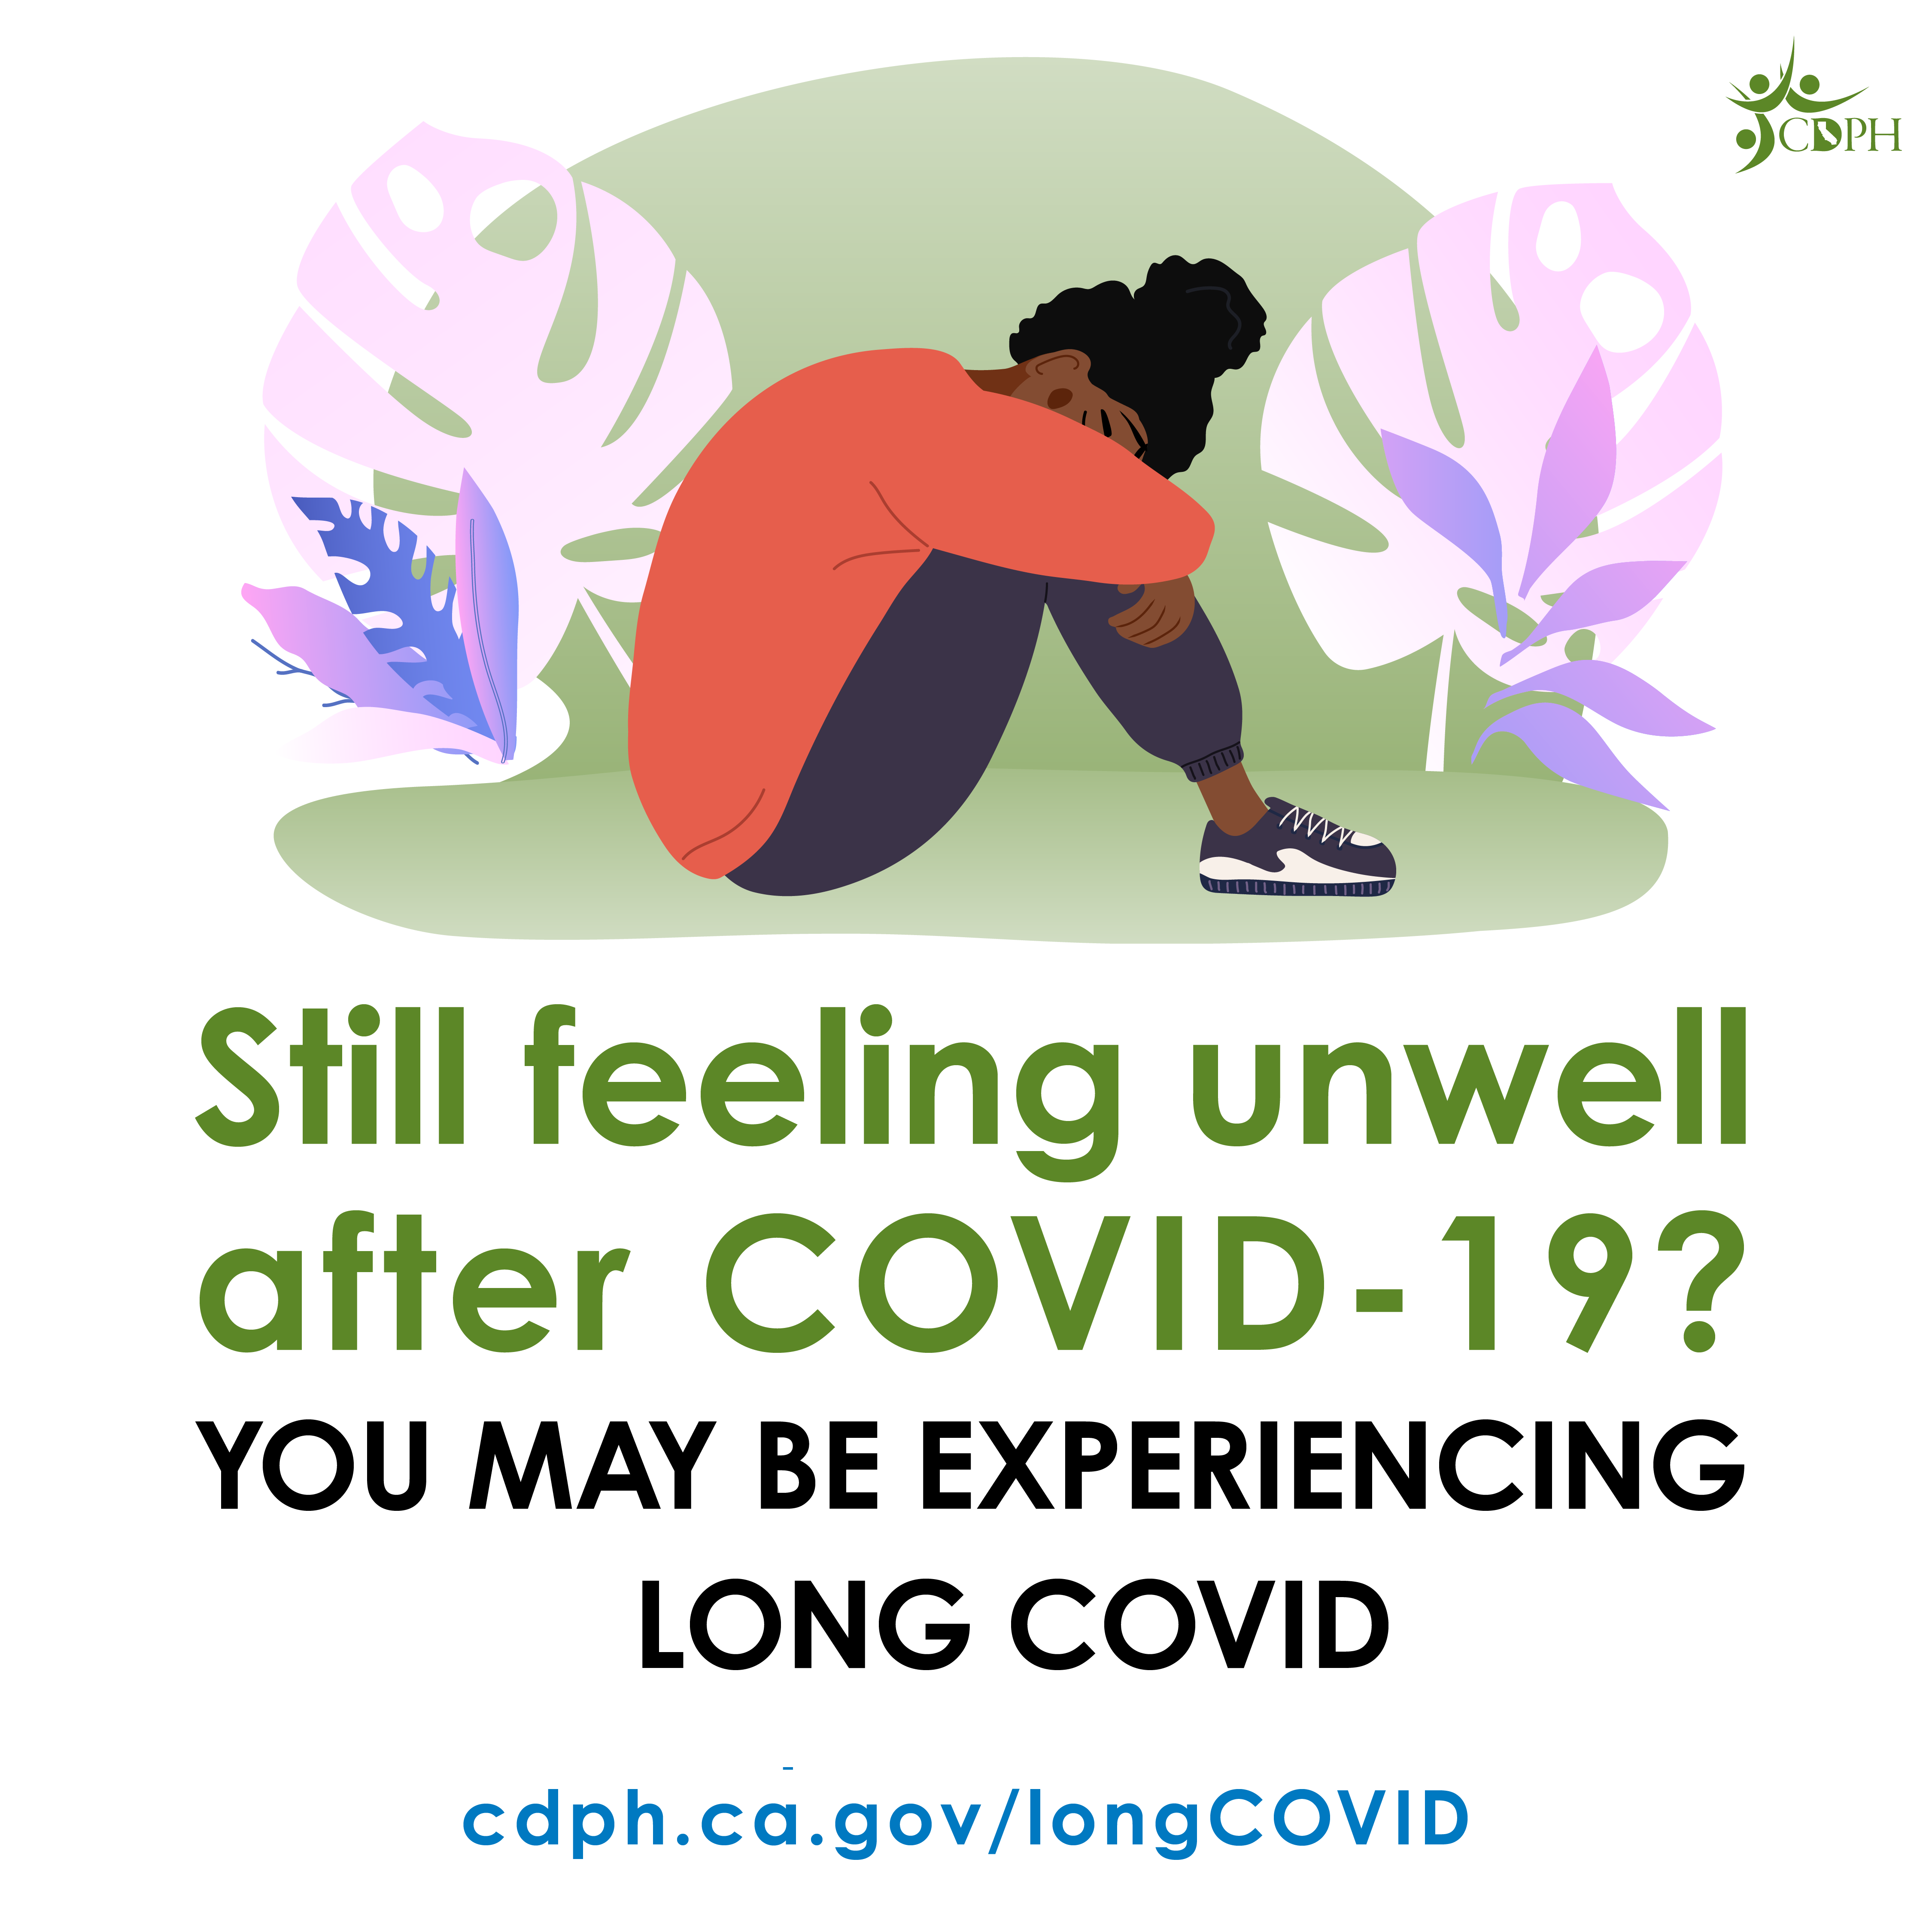 Still feeling unwell after COVID-19? You may be experiencing Long COVID